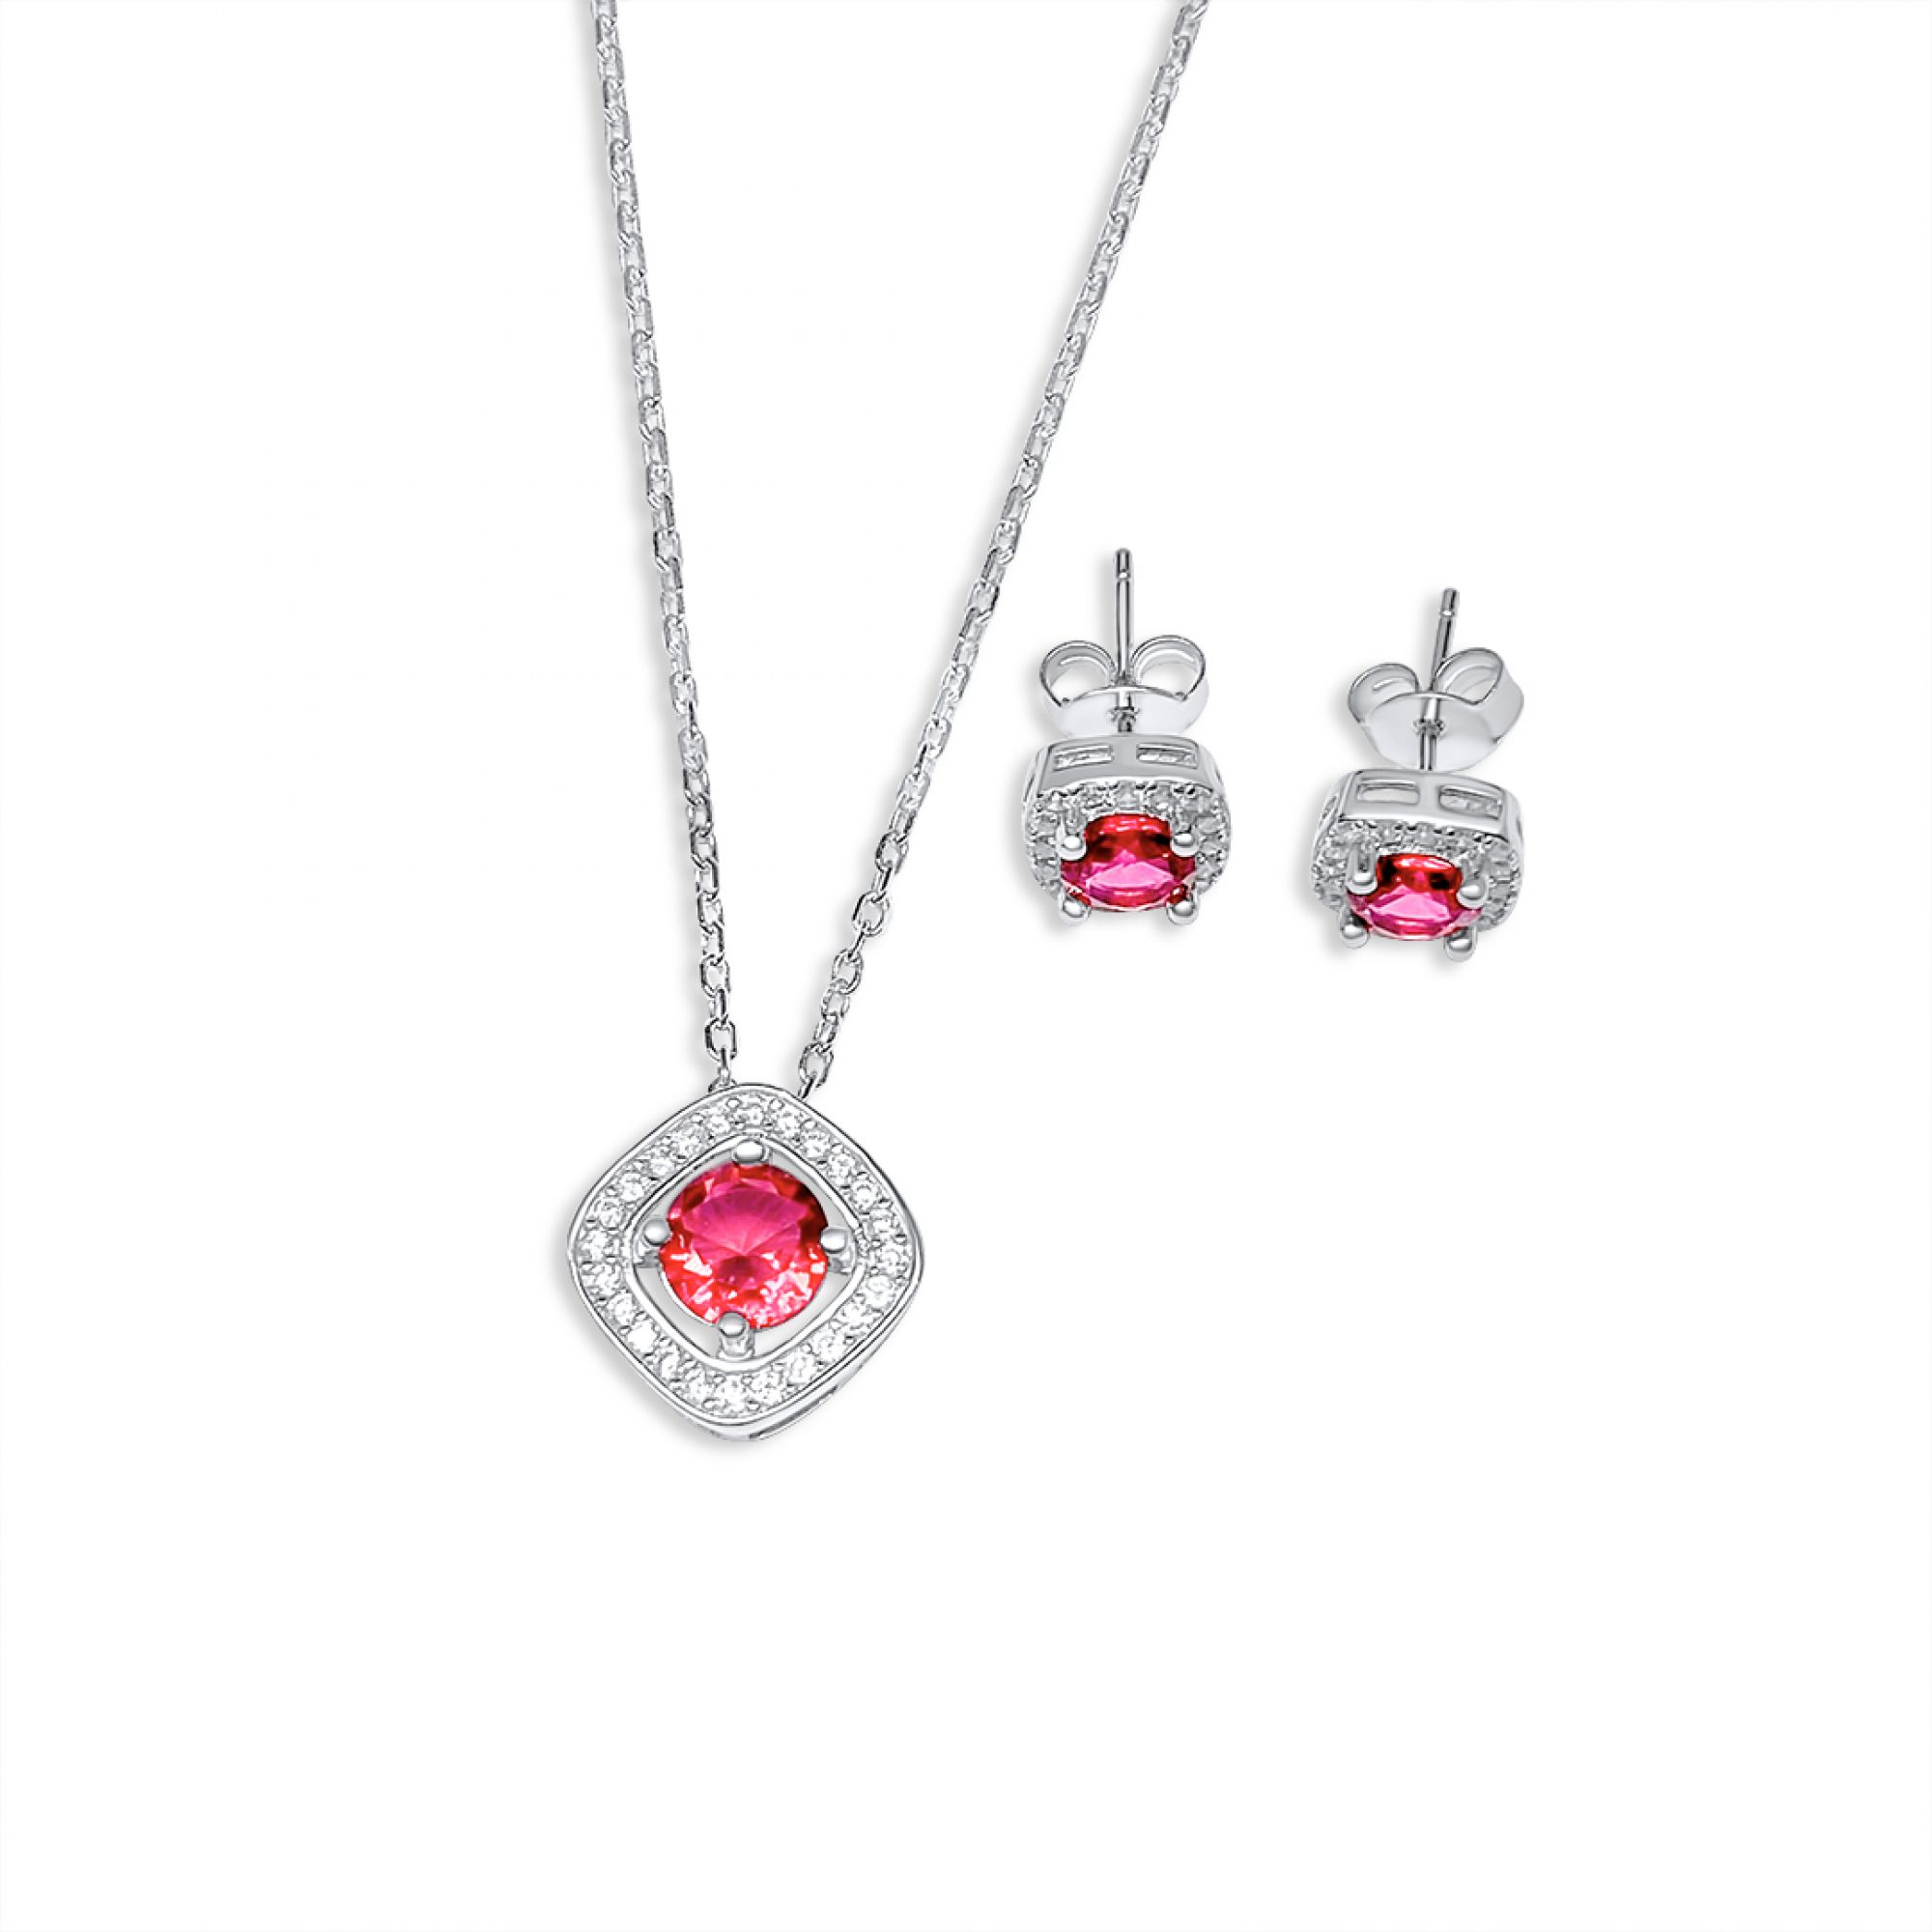 Set with ruby and zircon stones